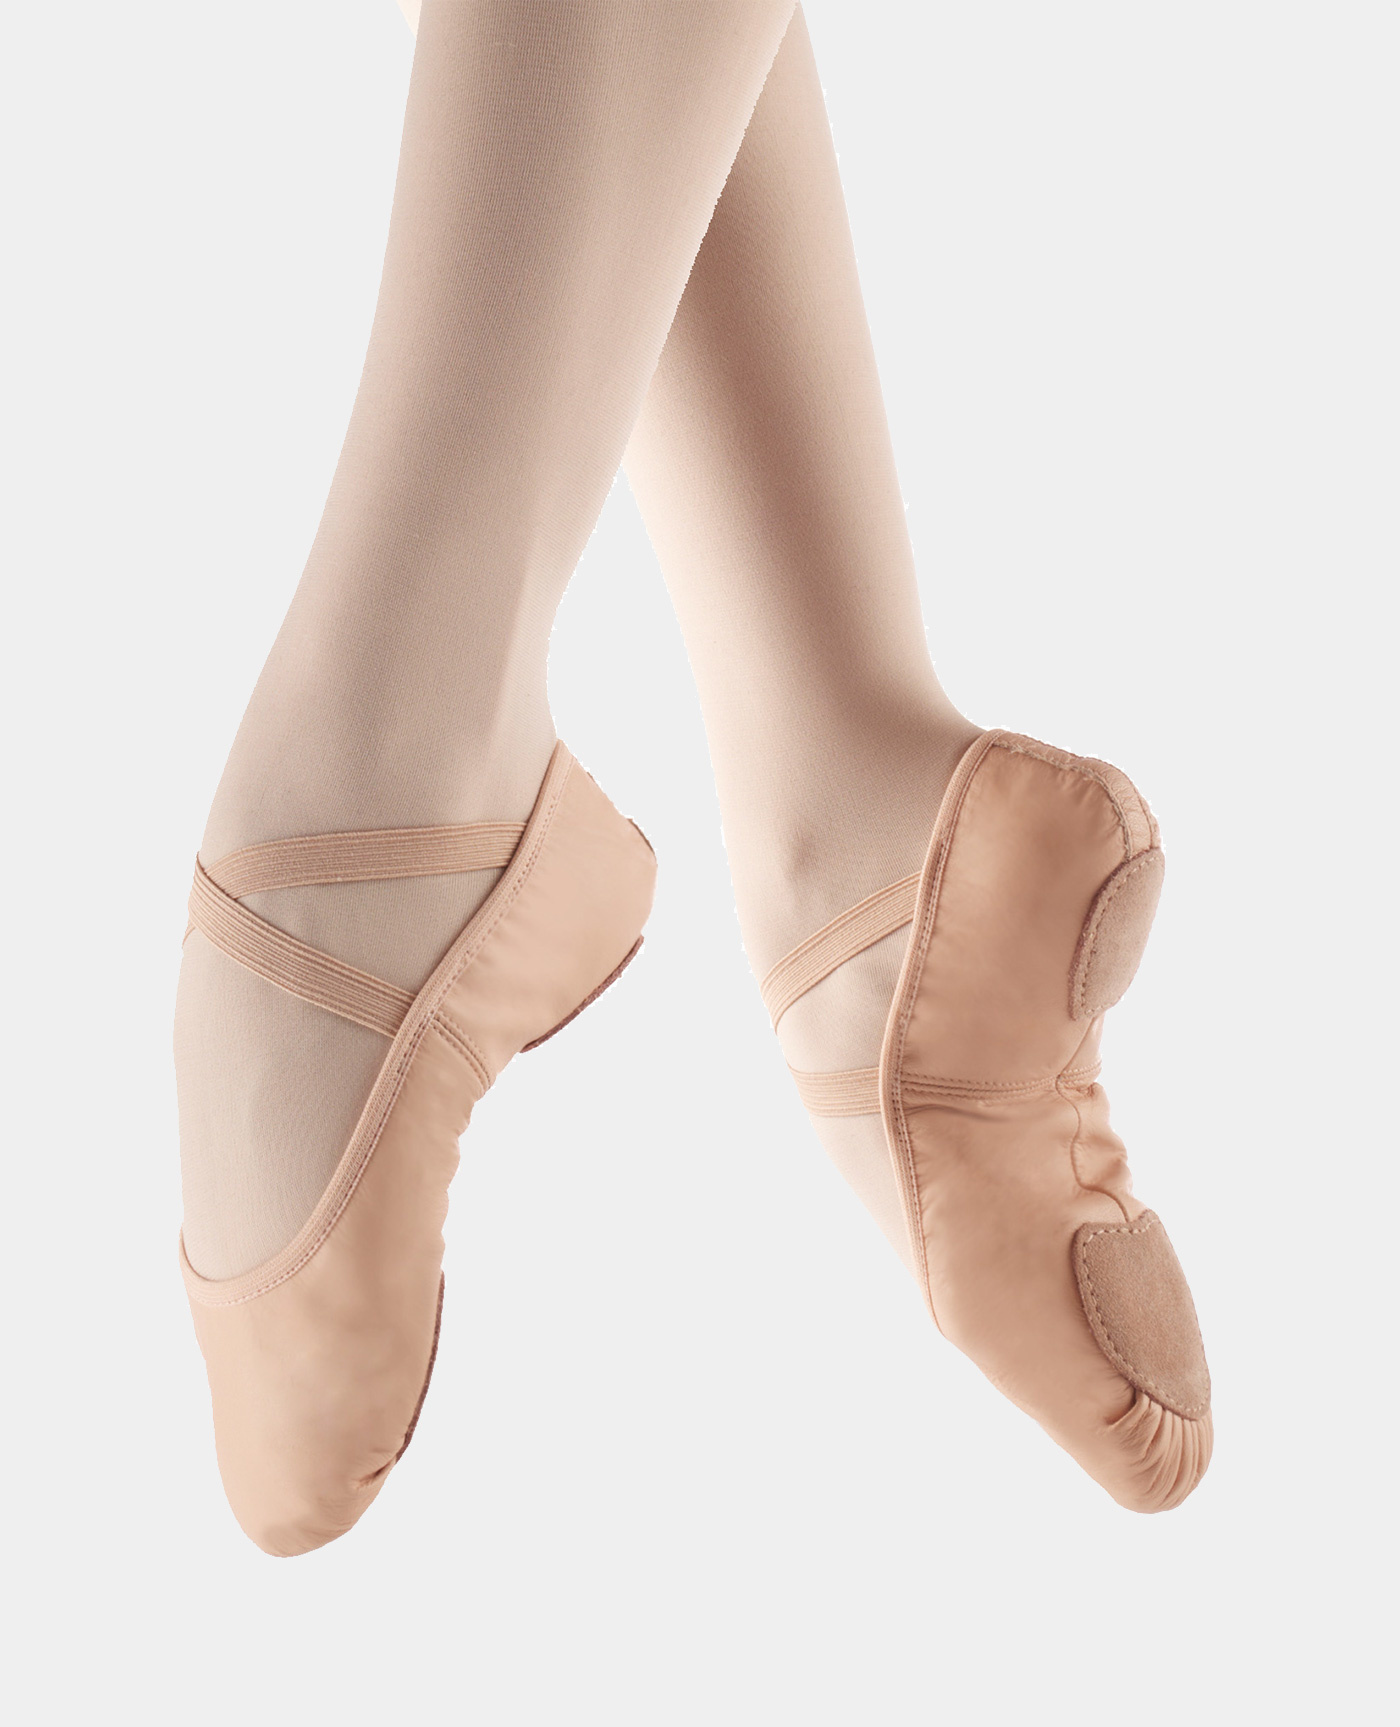 ballet shoes leather